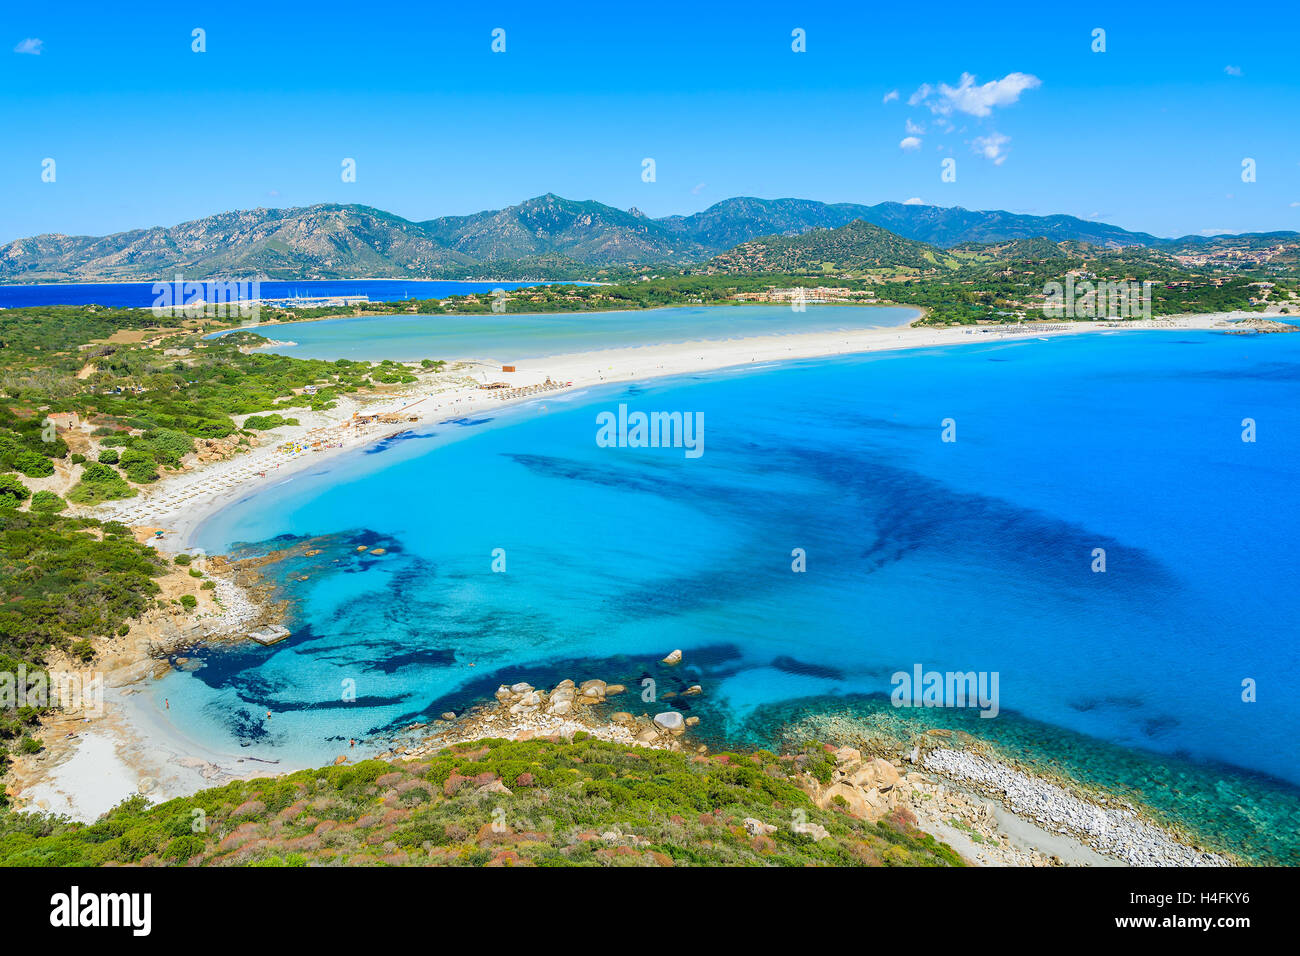 View of a beautiful bay with azure sea  from top of a hill, Villasimius, Sardinia island, Italy Stock Photo